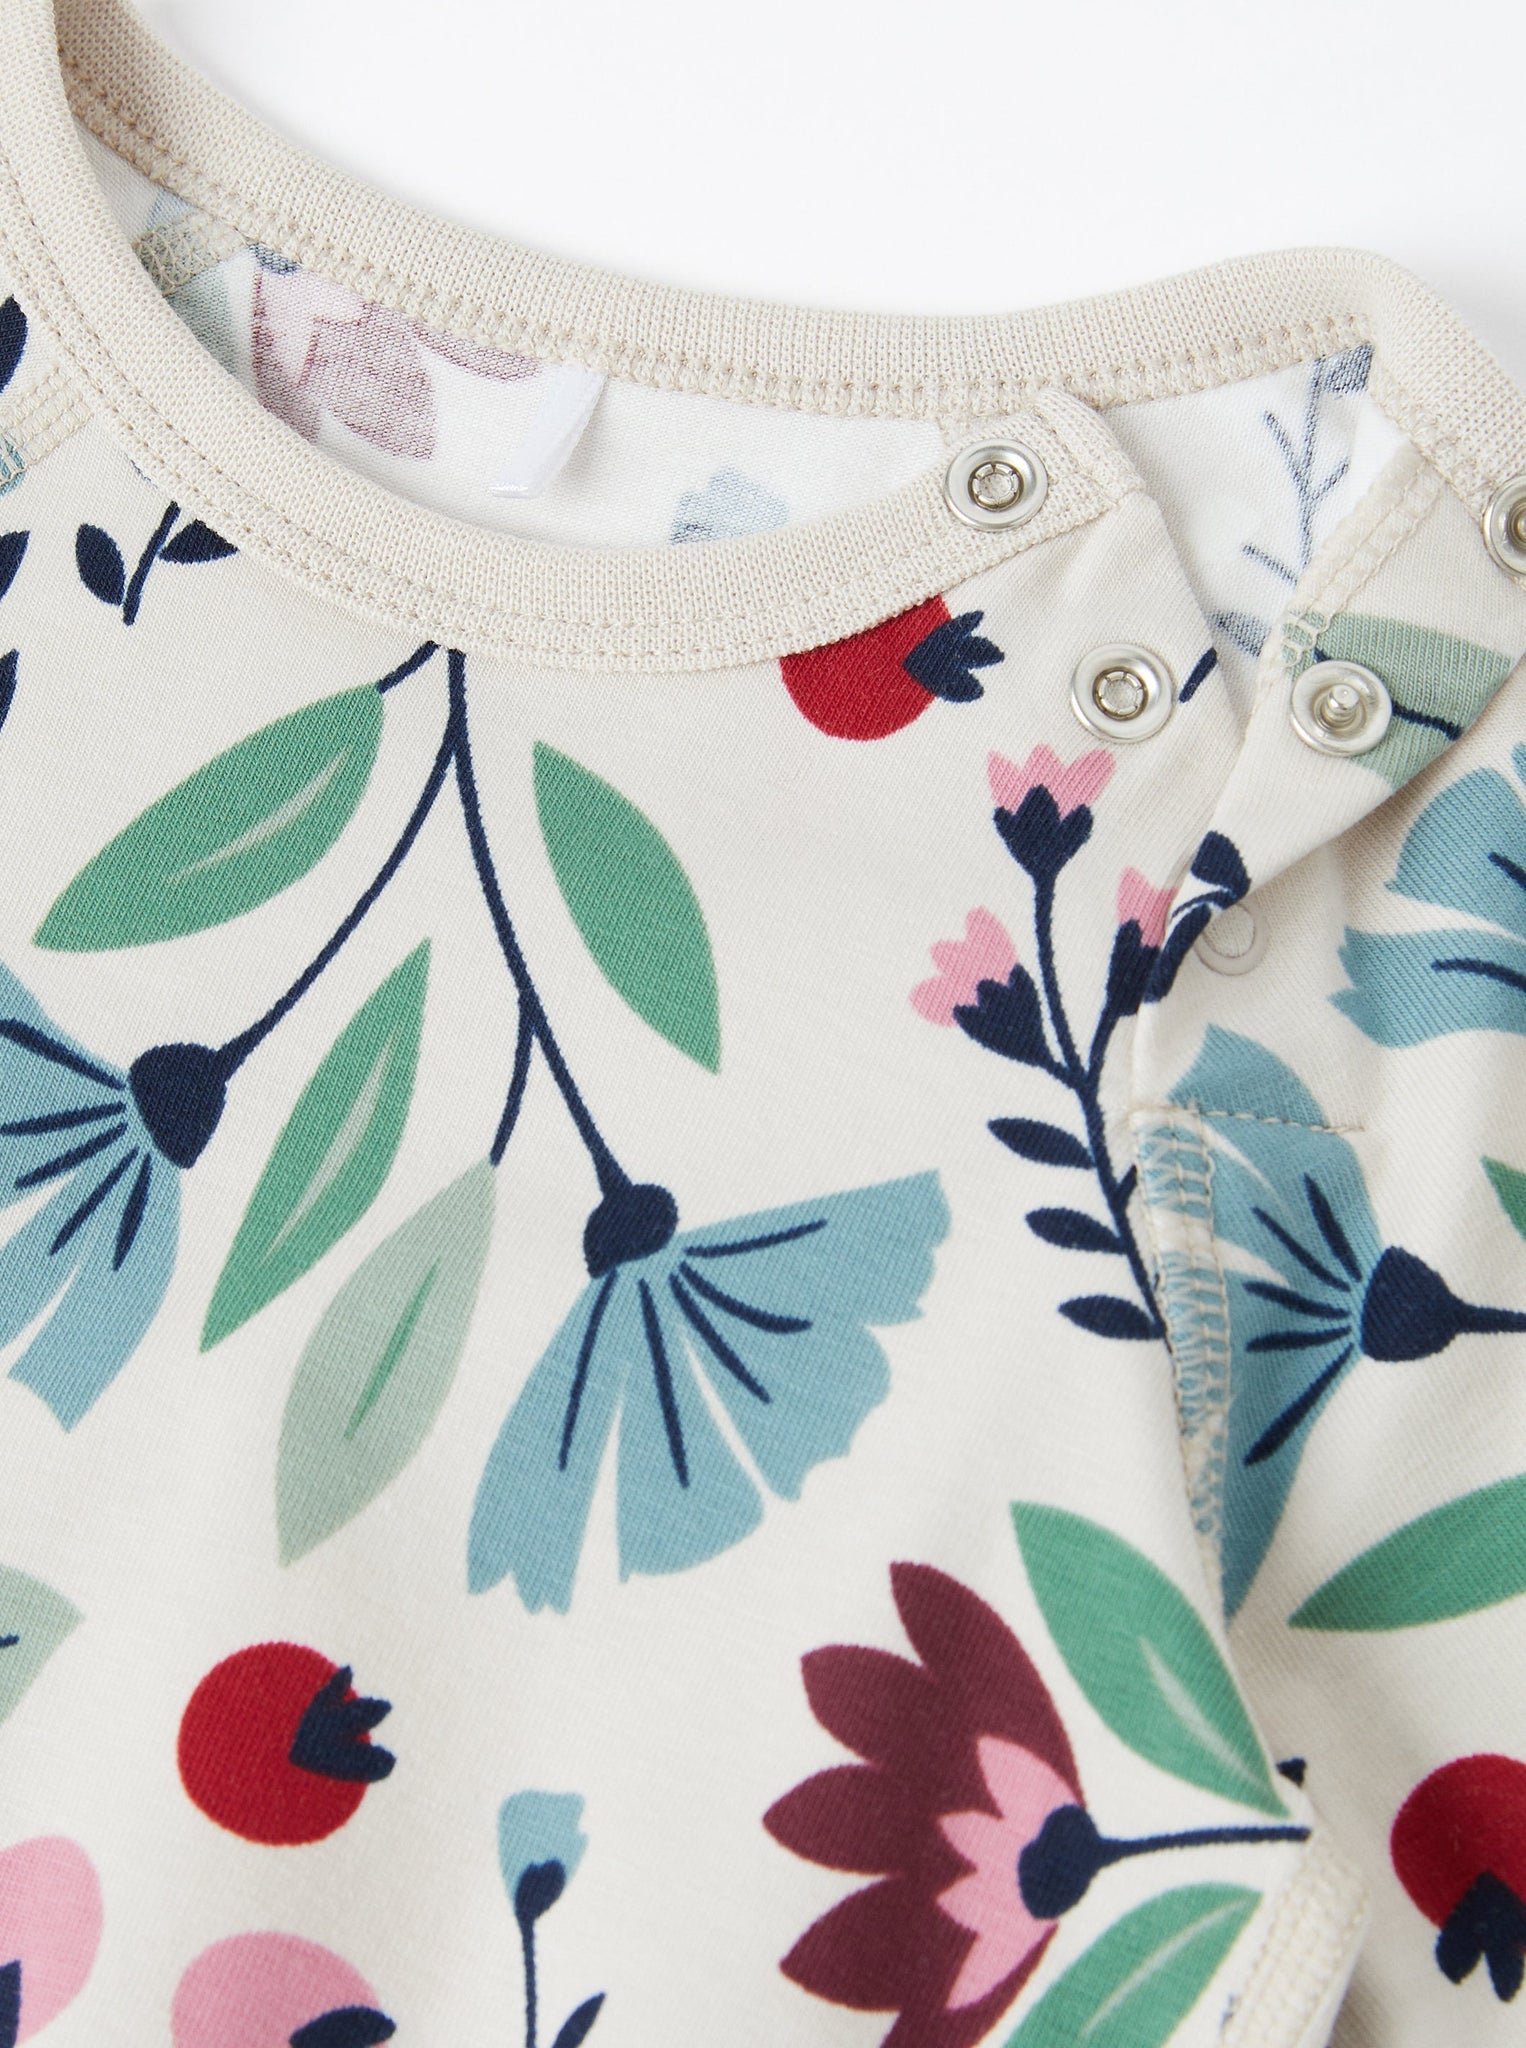 Organic Cotton Floral Print Babygrow from the Polarn O. Pyret baby collection. Nordic baby clothes made from sustainable sources.